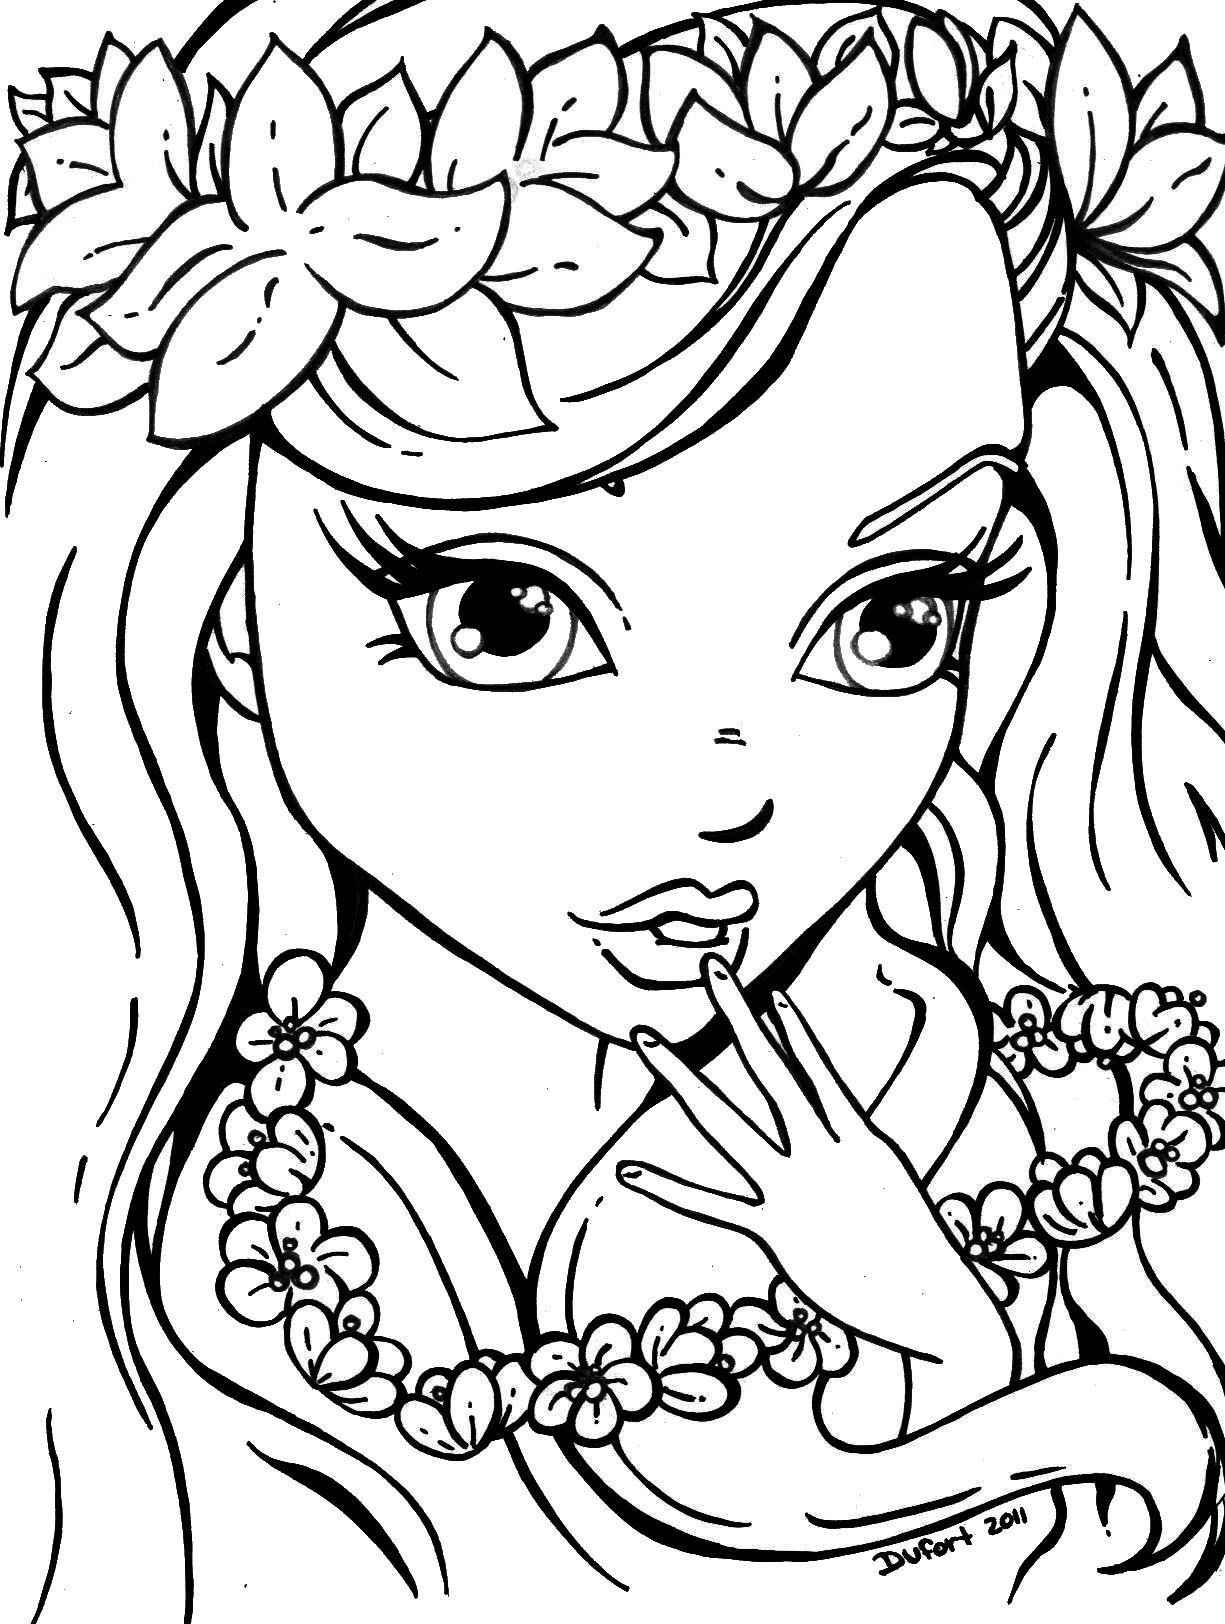 Coloring Ideas : 65 Marvelous Printable Coloring Sheets For Teens - Free Printable Coloring Pages For Teens